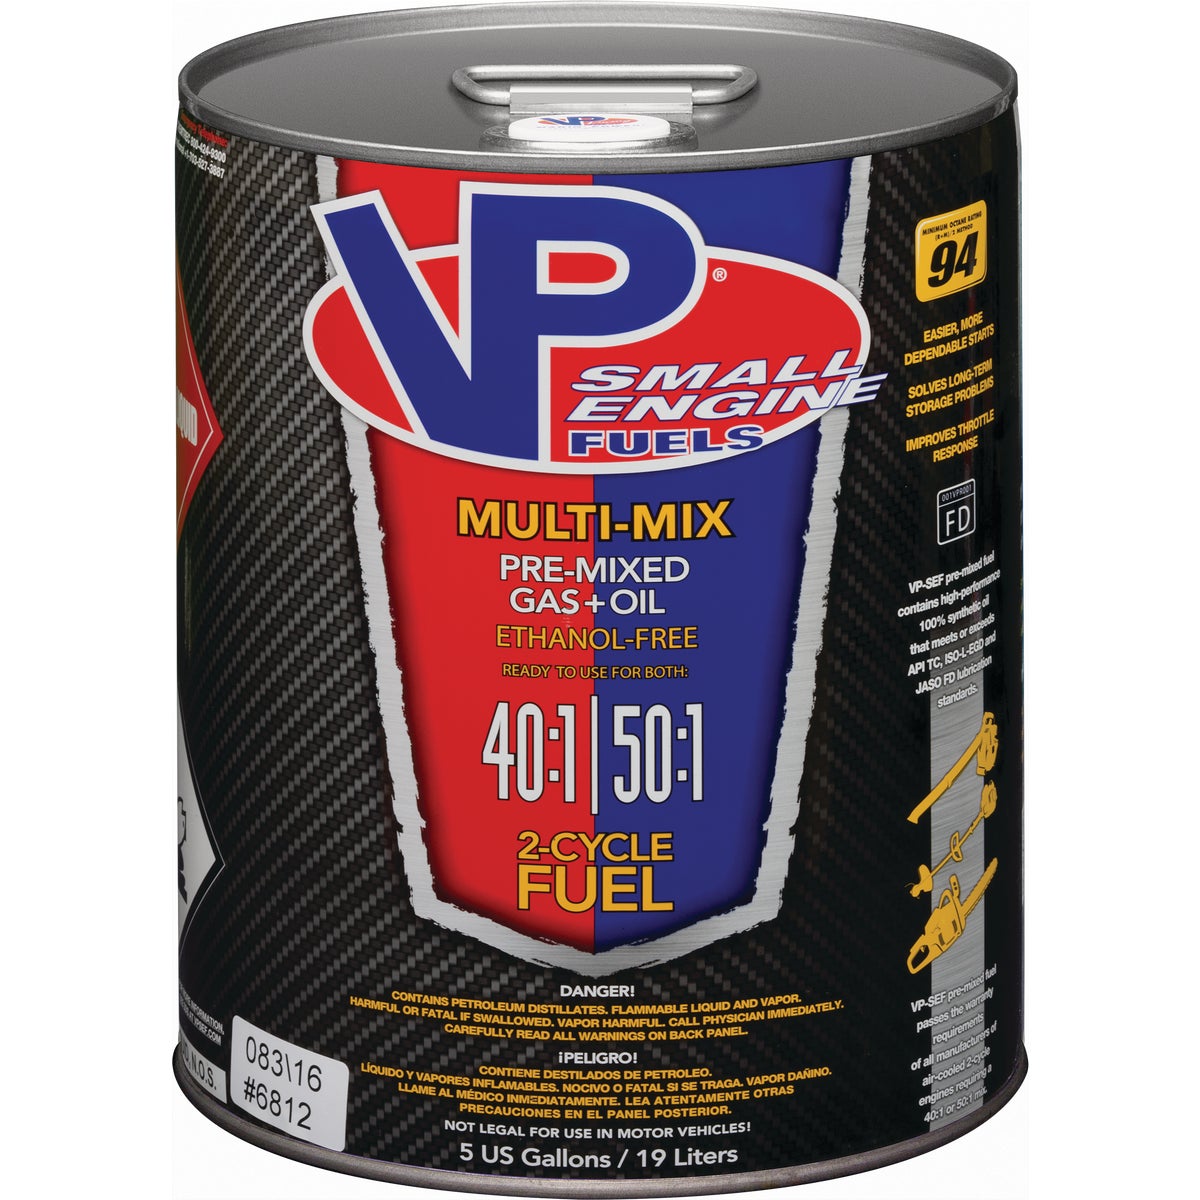 VP Small Engine Fuels 5 Gal. 40:1/50:1 Ethanol-Free Multi-Mix Gas & Oil Pre-Mix